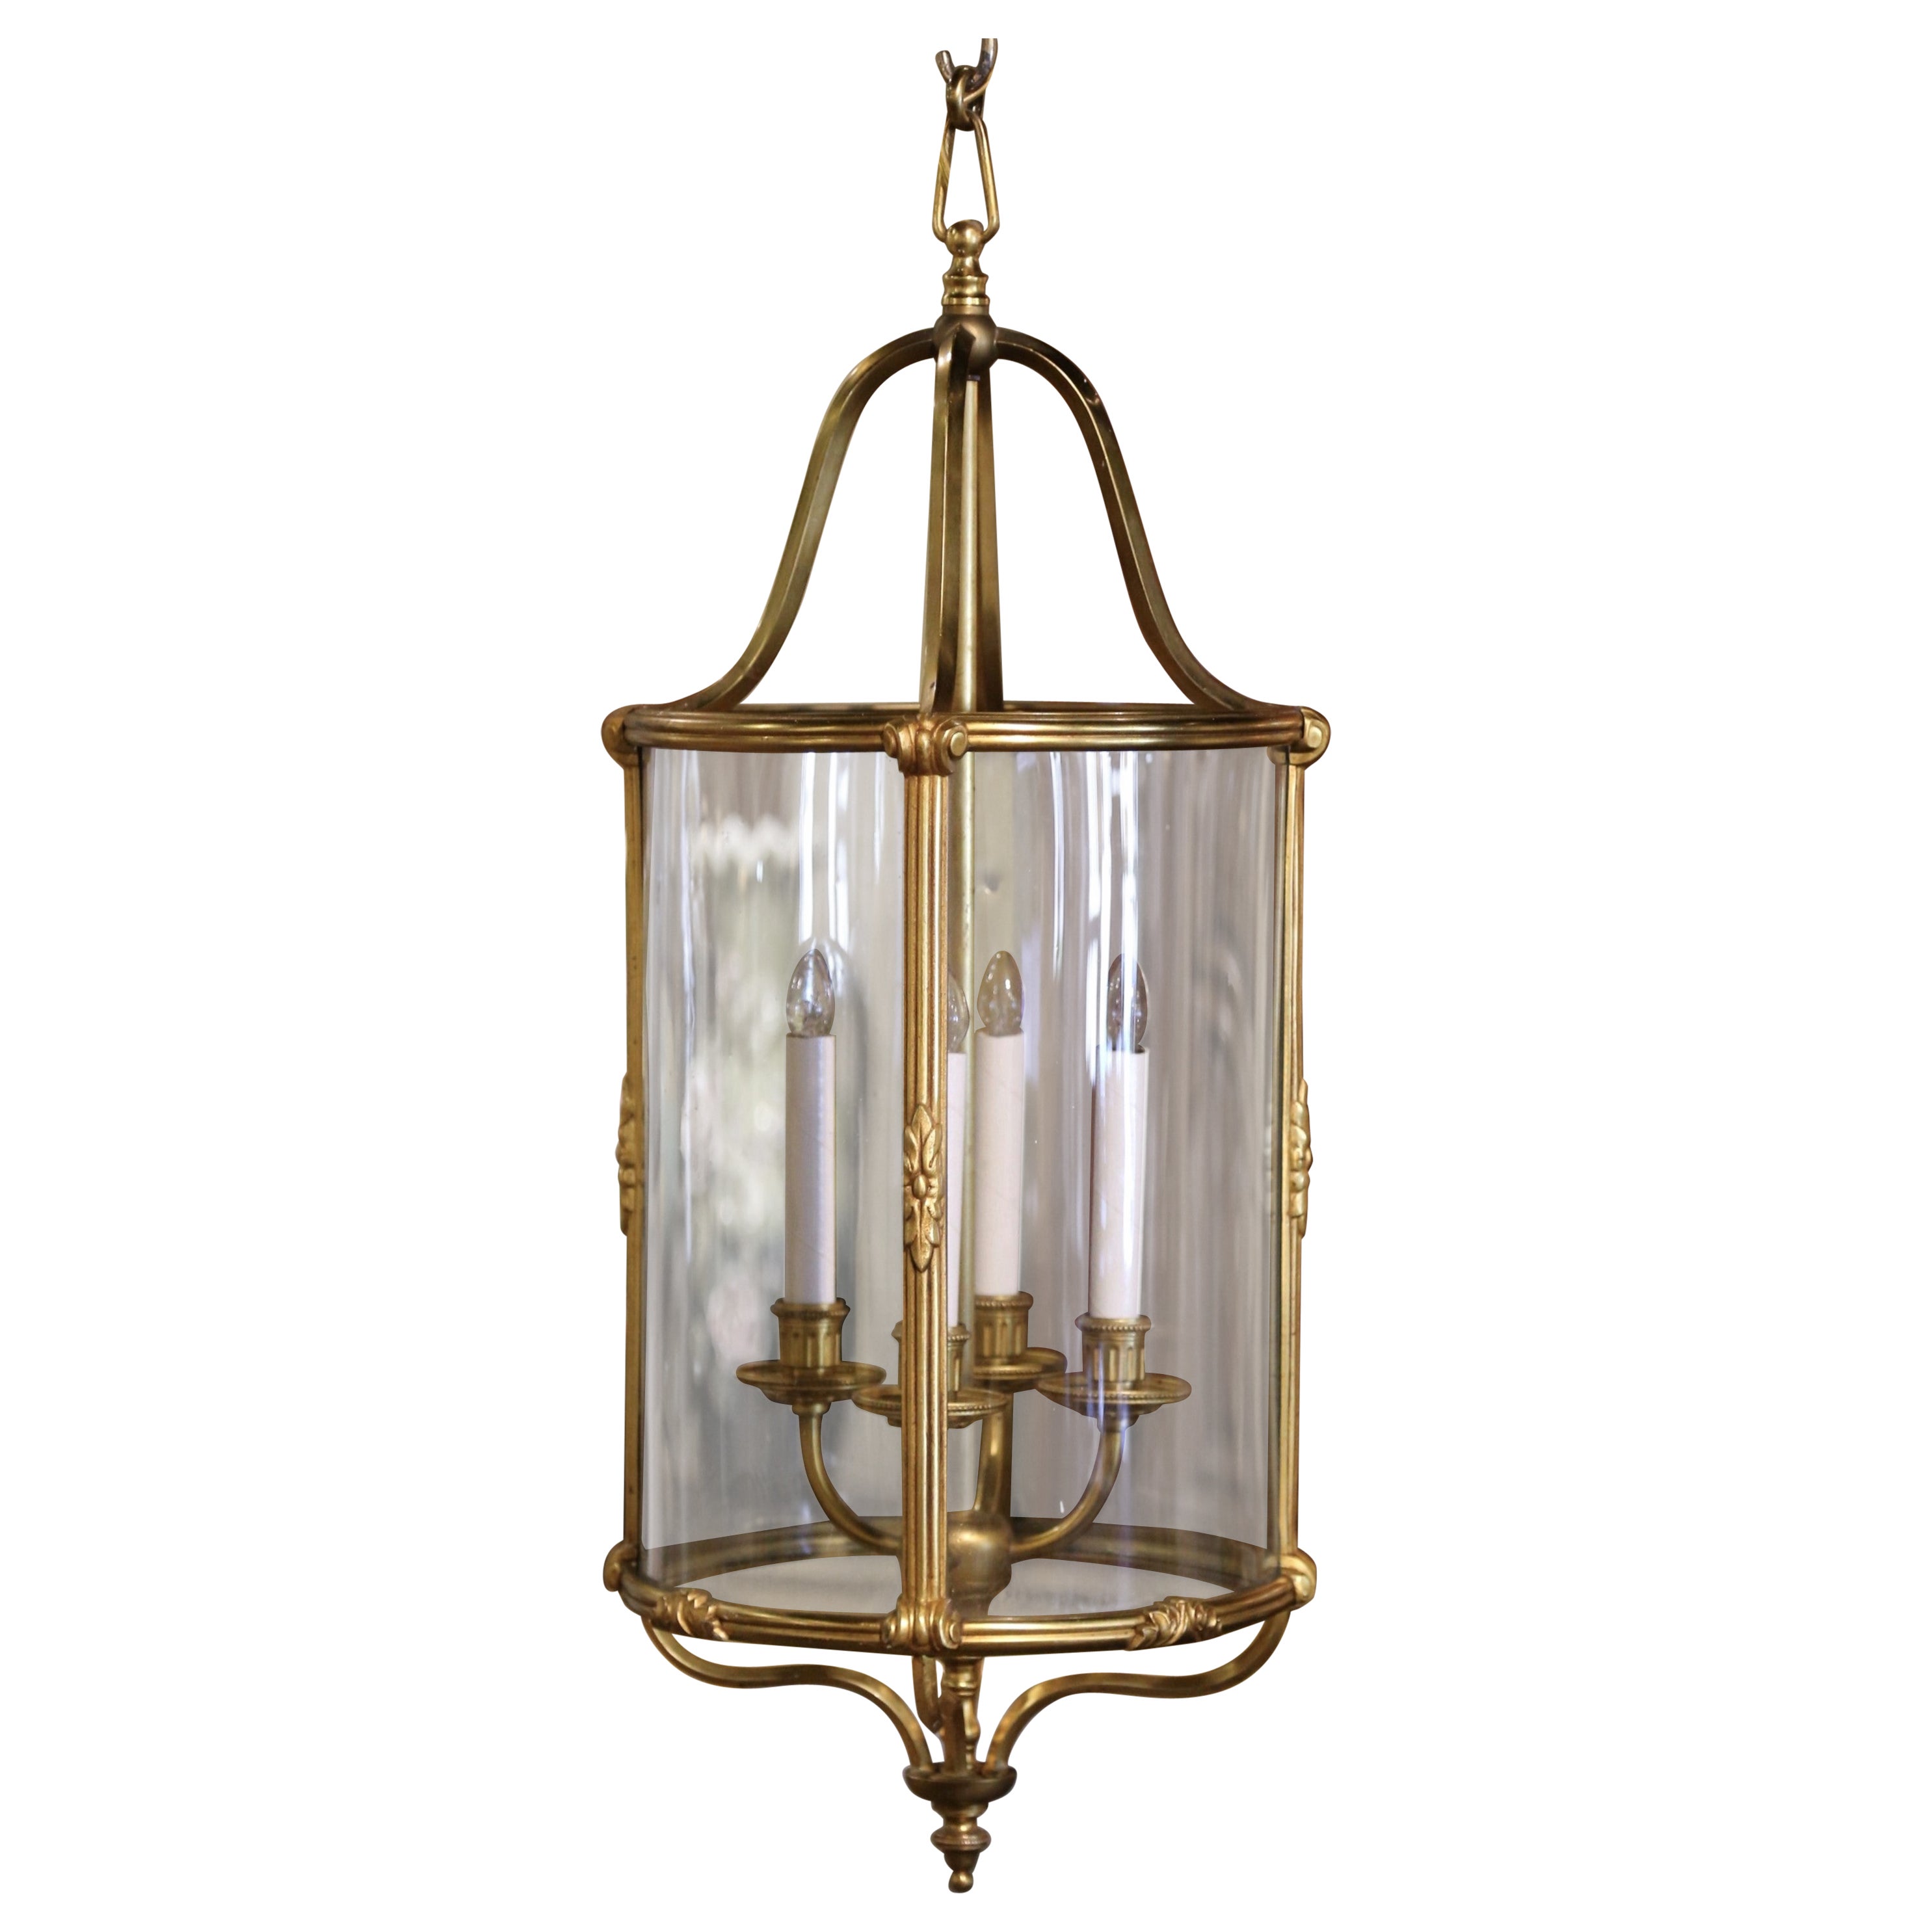  Mid-Century French Napoleon III Bronze and Glass Four-Light Ceiling Lantern 